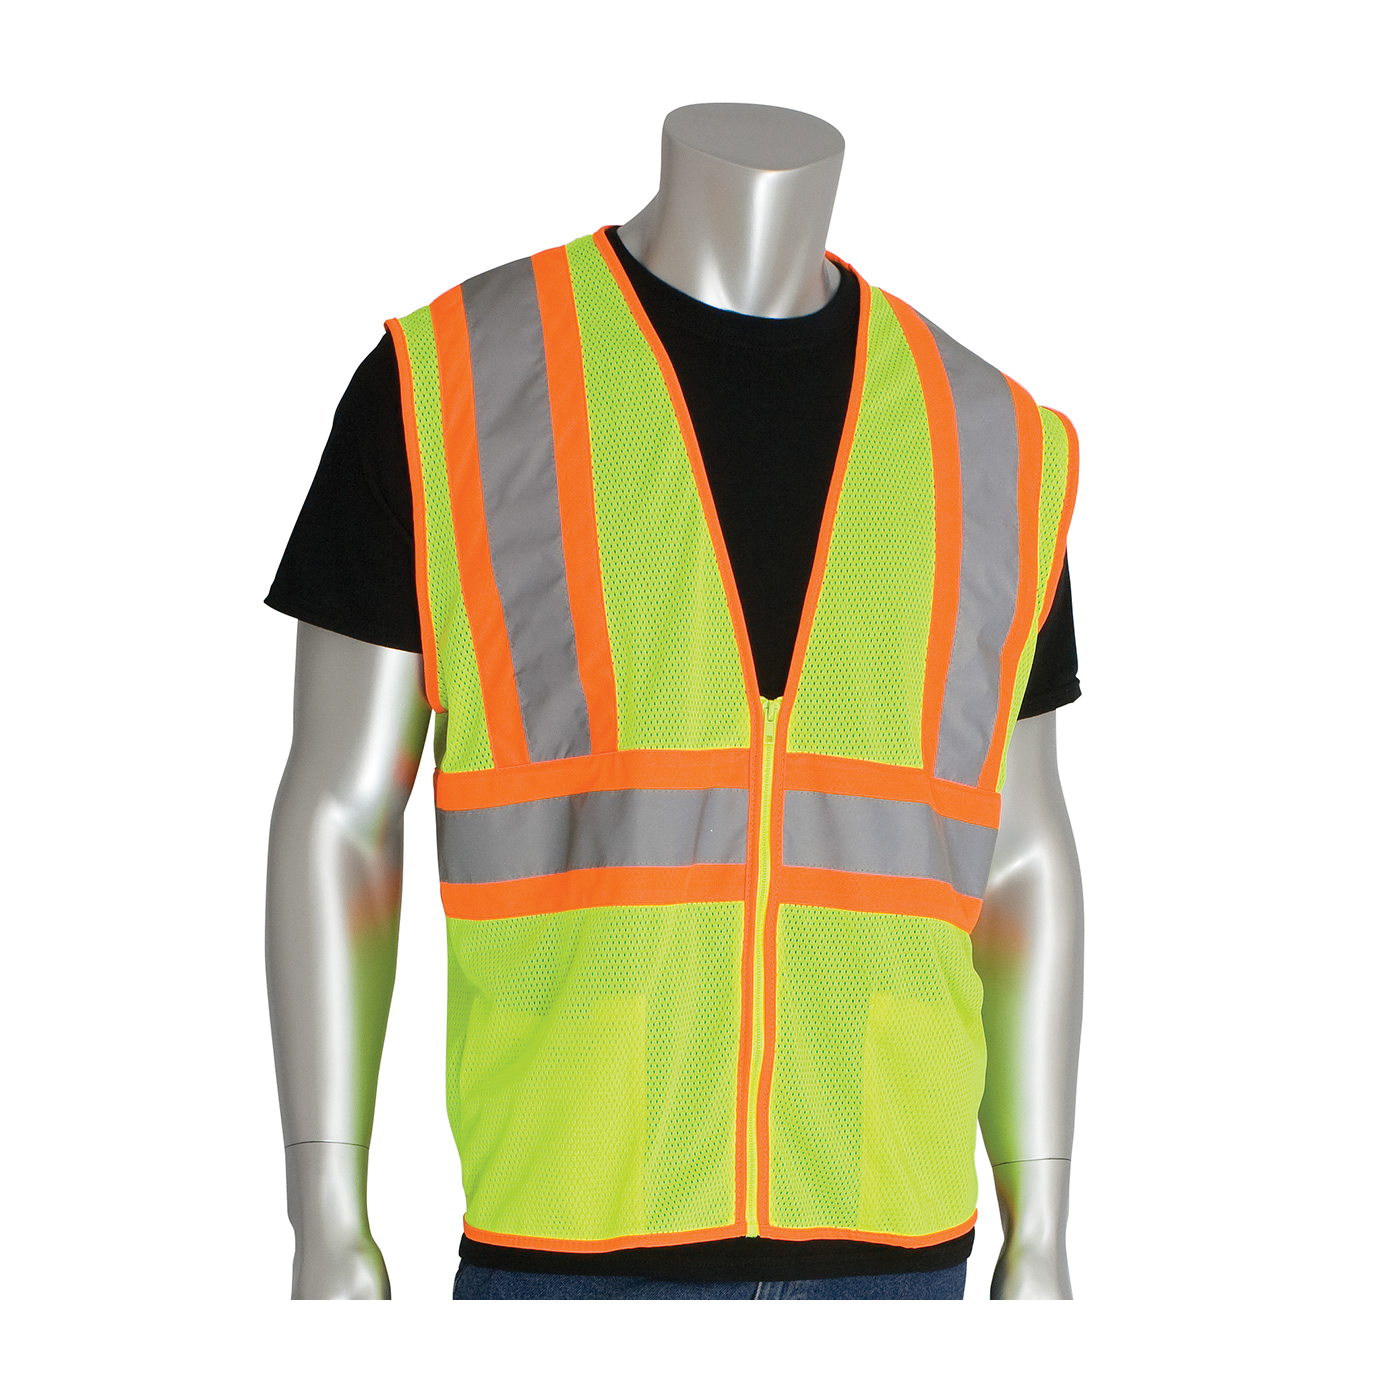 PIP® 302-MVLY-M 2-Tone Safety Vest, M, Hi-Viz Lime Yellow, Polyester Mesh, Zipper Closure, 2 Pockets, ANSI Class: Class 2, Specifications Met: ANSI 107 Type R